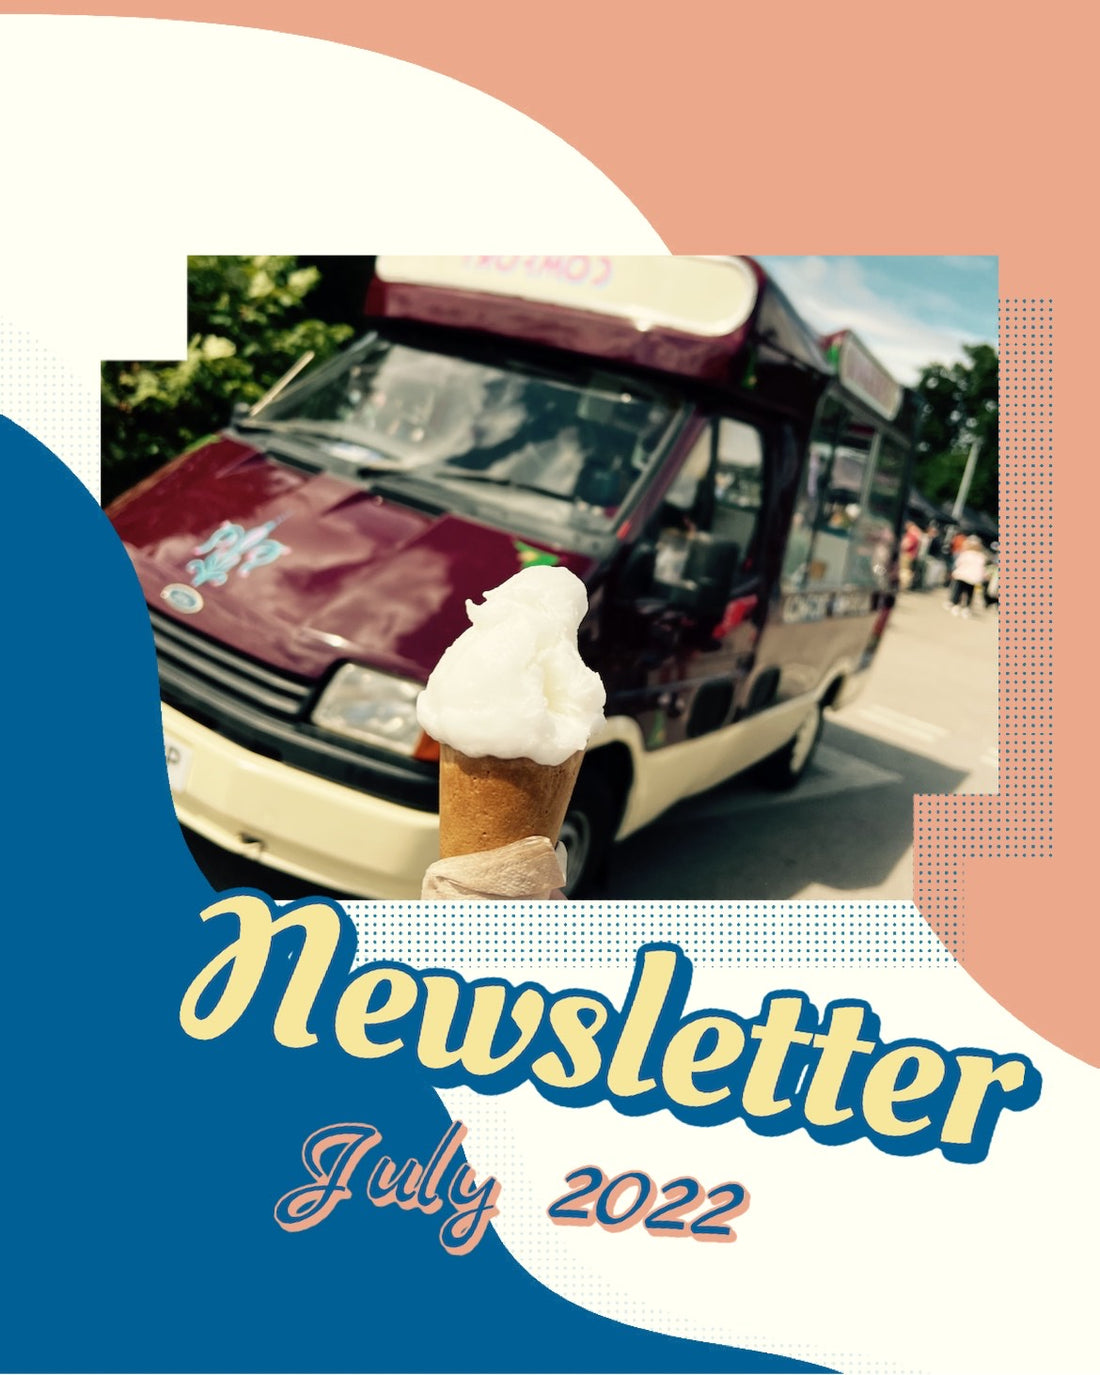 July is here and so is our first ever newsletter!